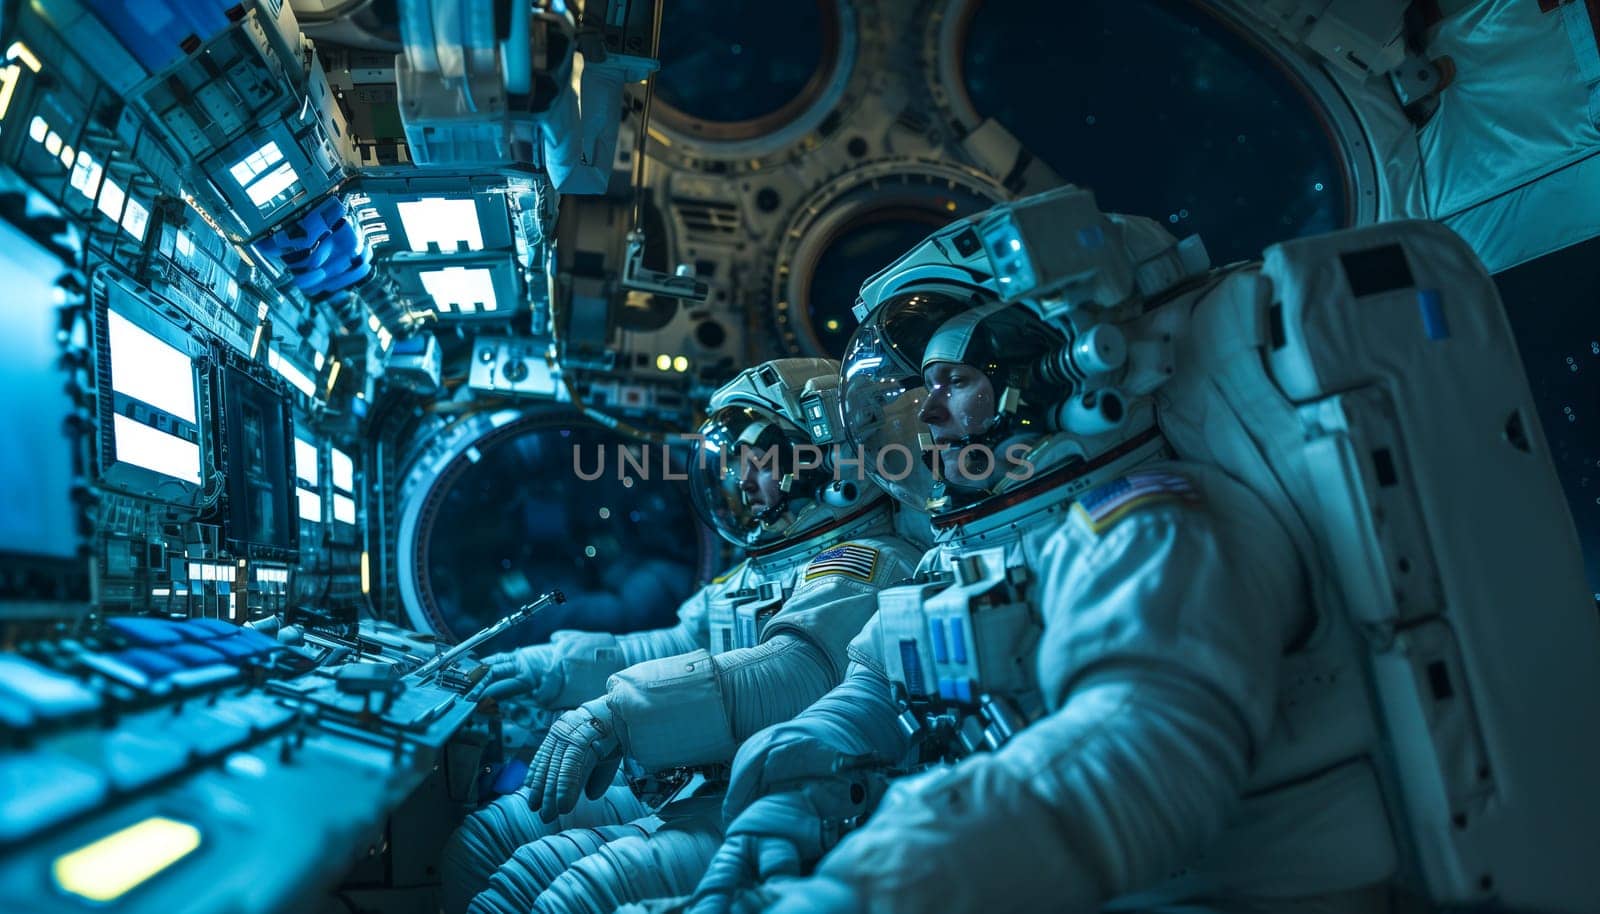 Two astronauts using control panel while orbiting around a planet in a spaceship by sarymsakov